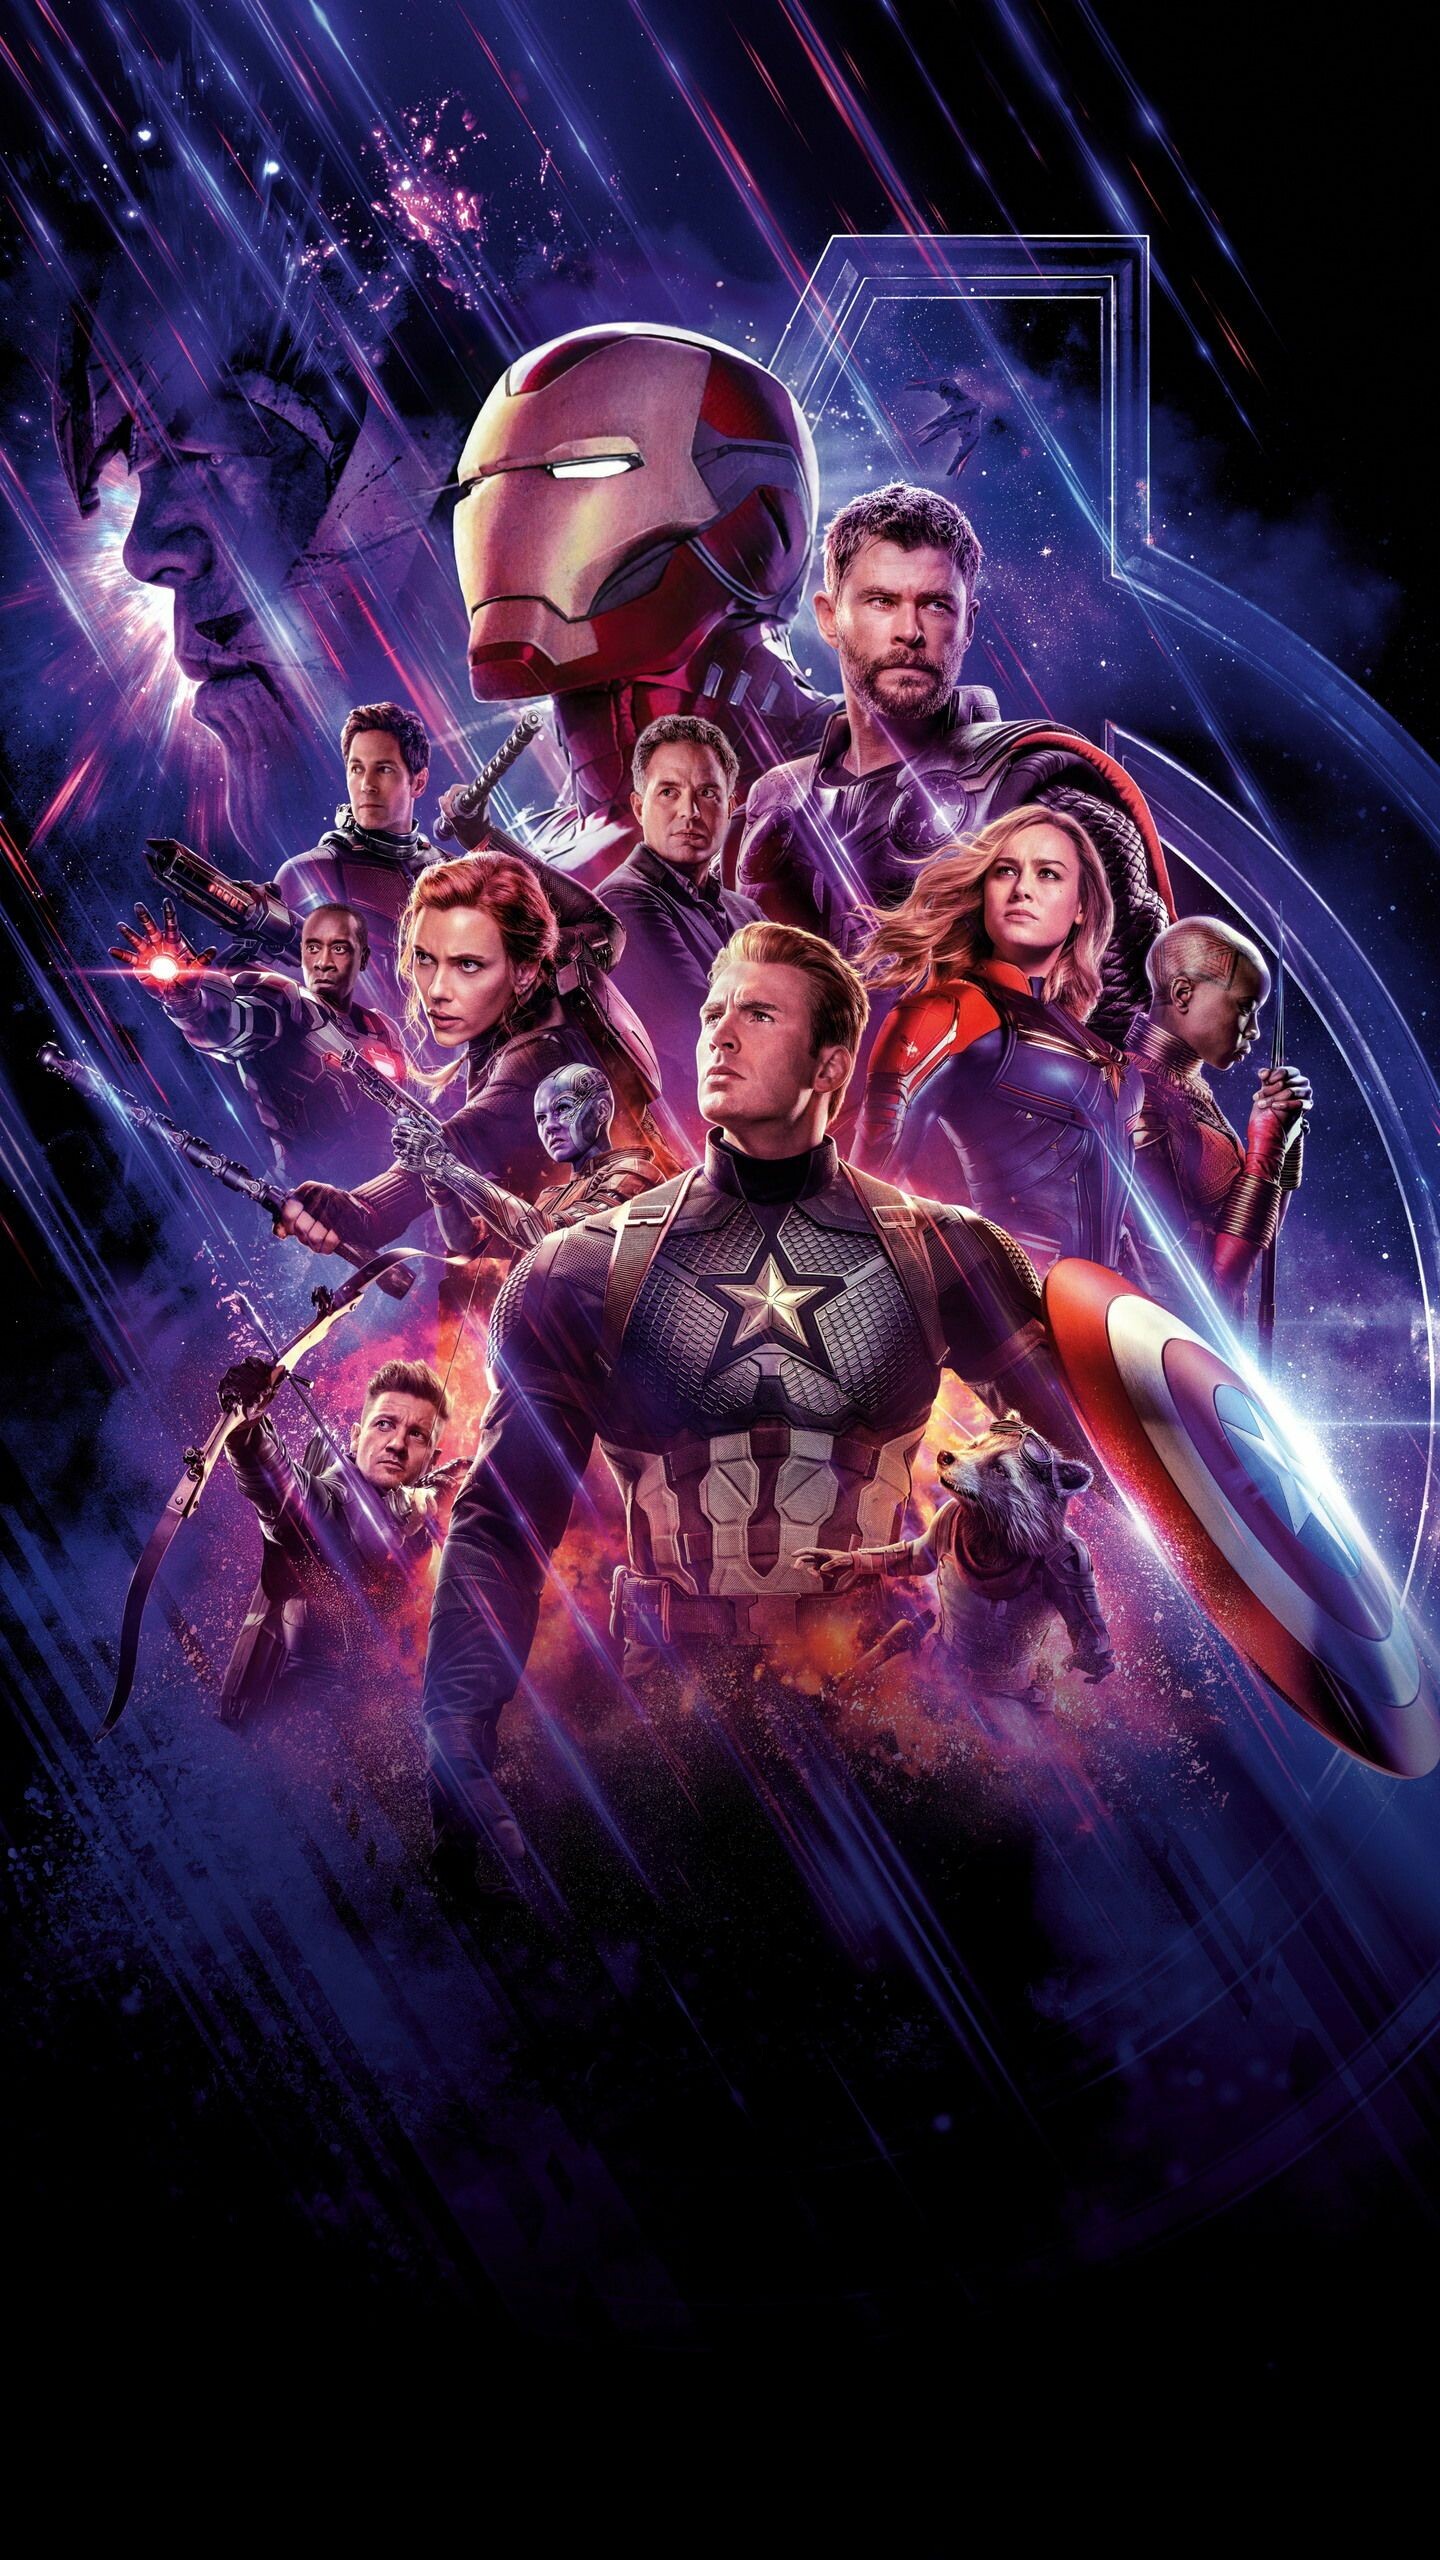 Avengers: After S.H.I.E.L.D. became a defunct agency due to the HYDRA infiltration, the team was no longer an American governmental division, therefore becoming an independent and private organization. 1440x2560 HD Wallpaper.